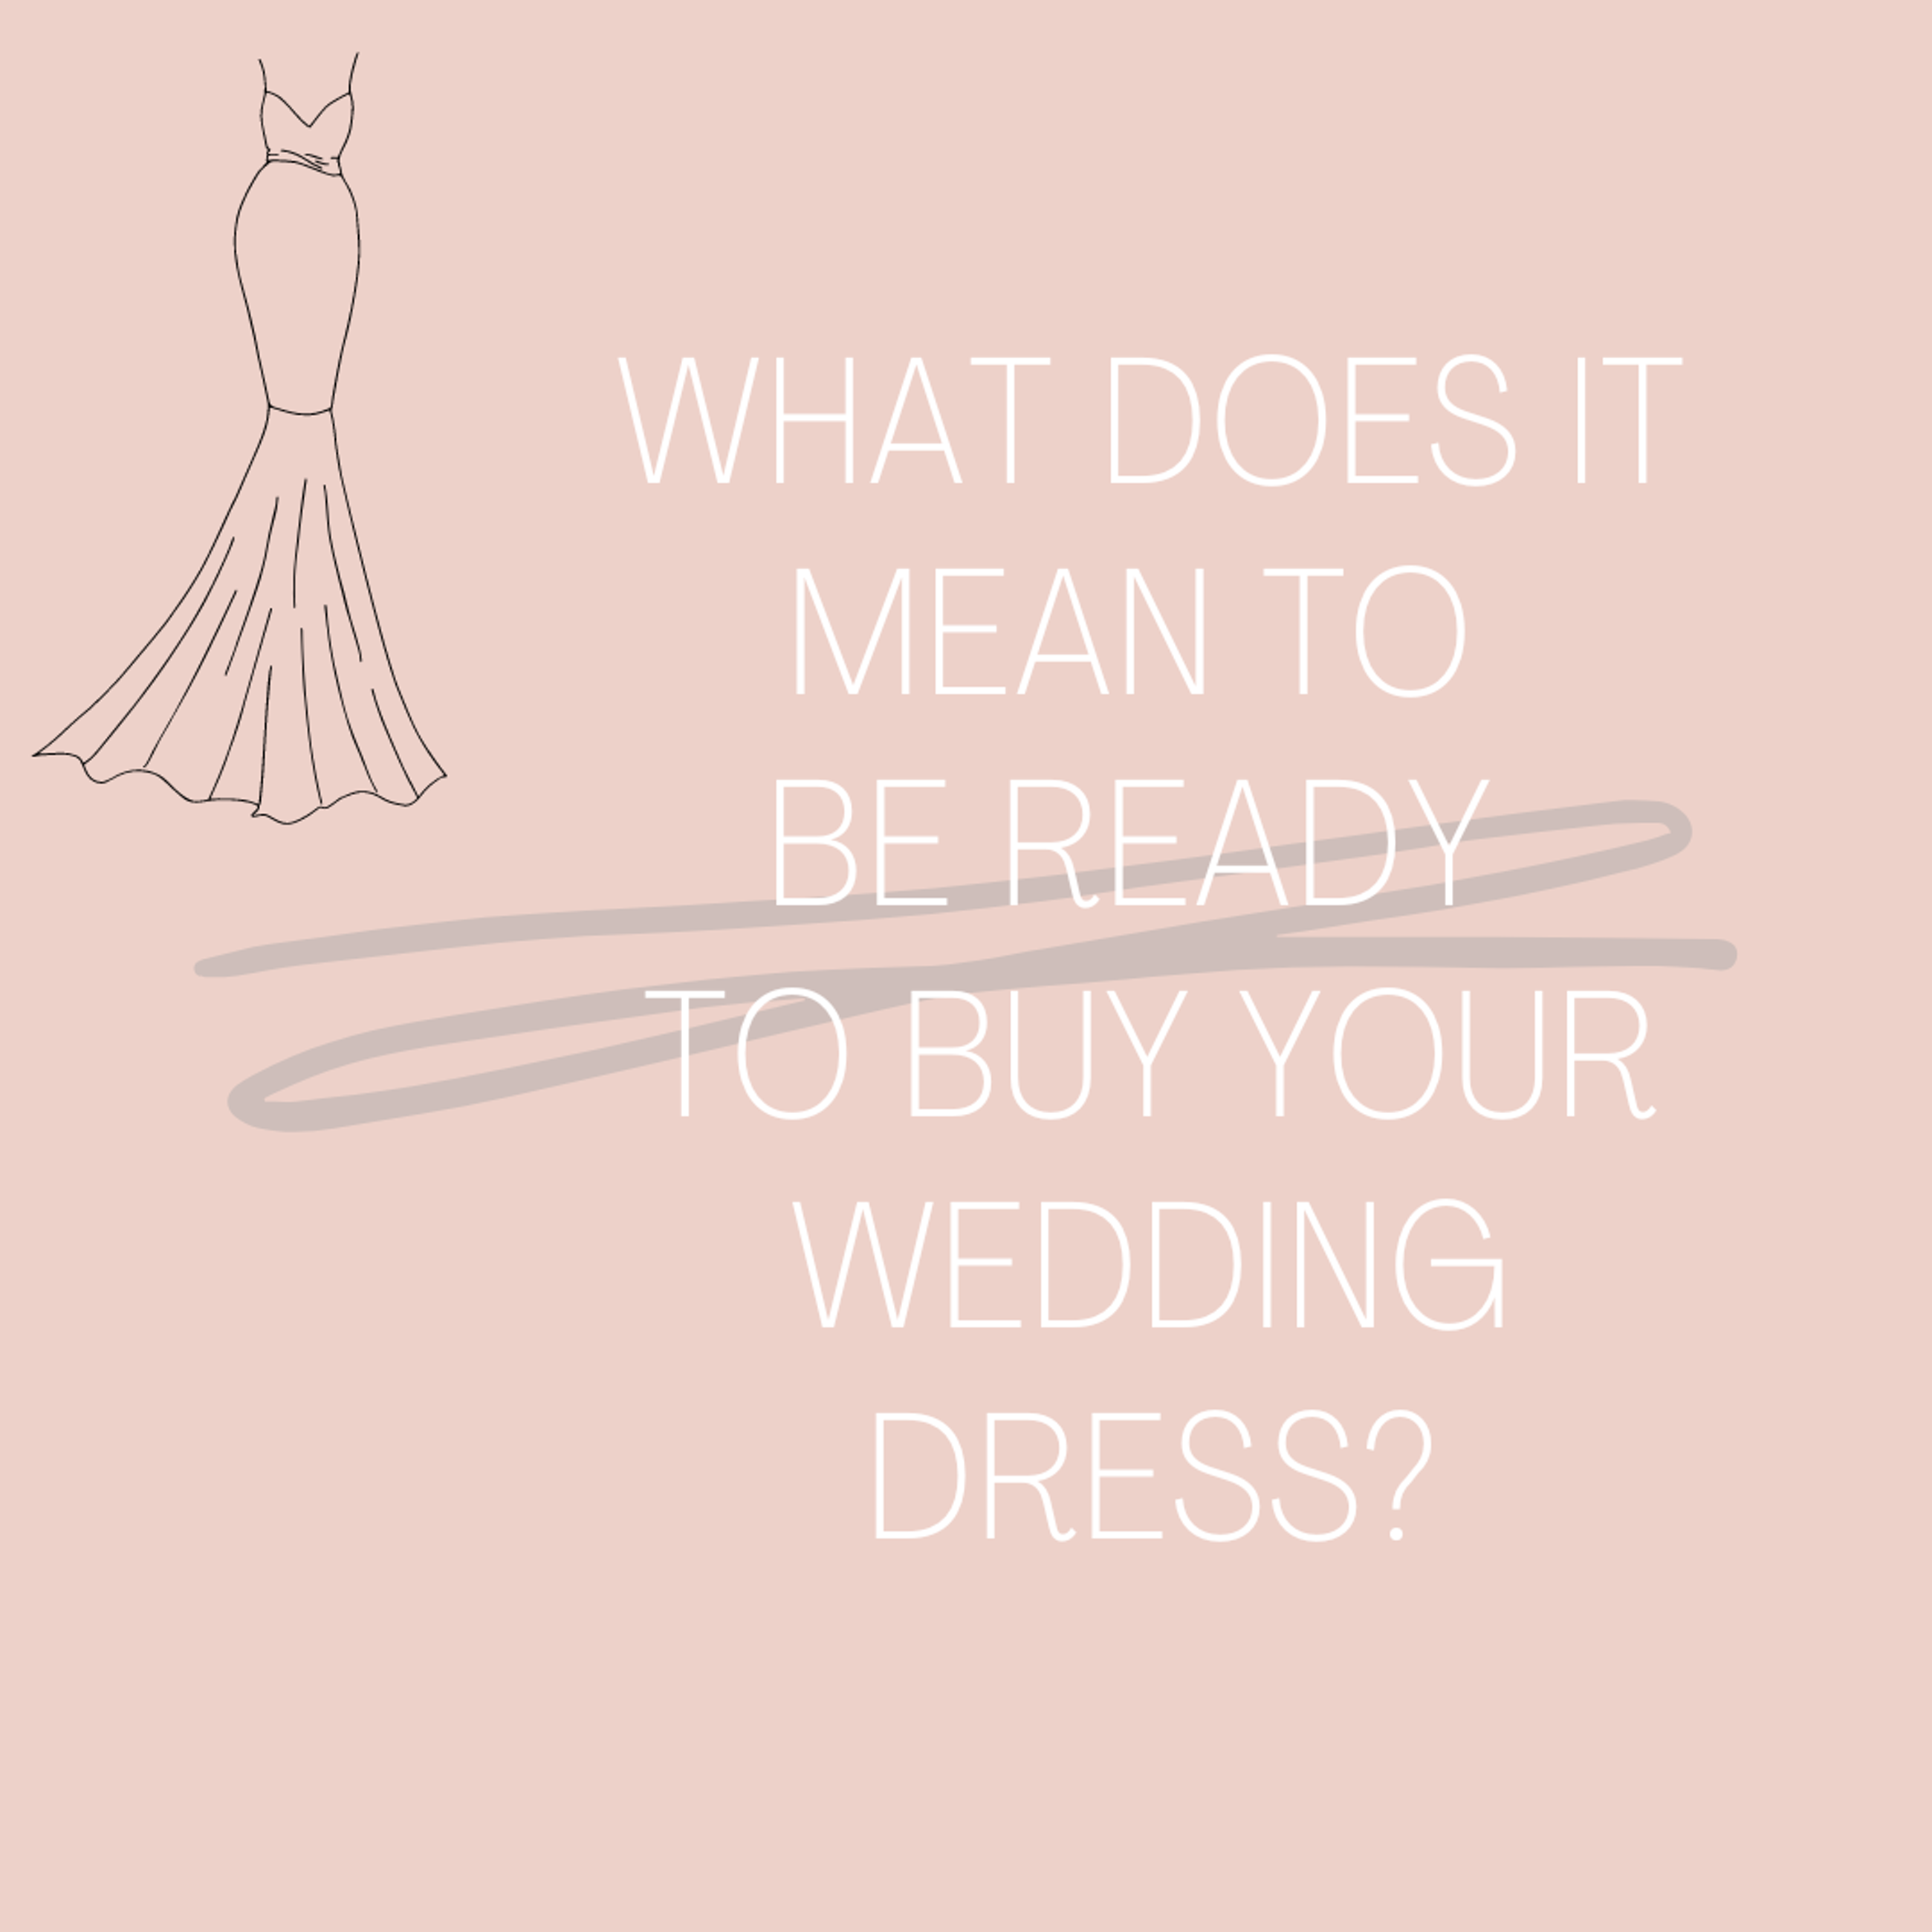 What Does It Mean To Be Ready To Buy Your Wedding Dress?. Desktop Image